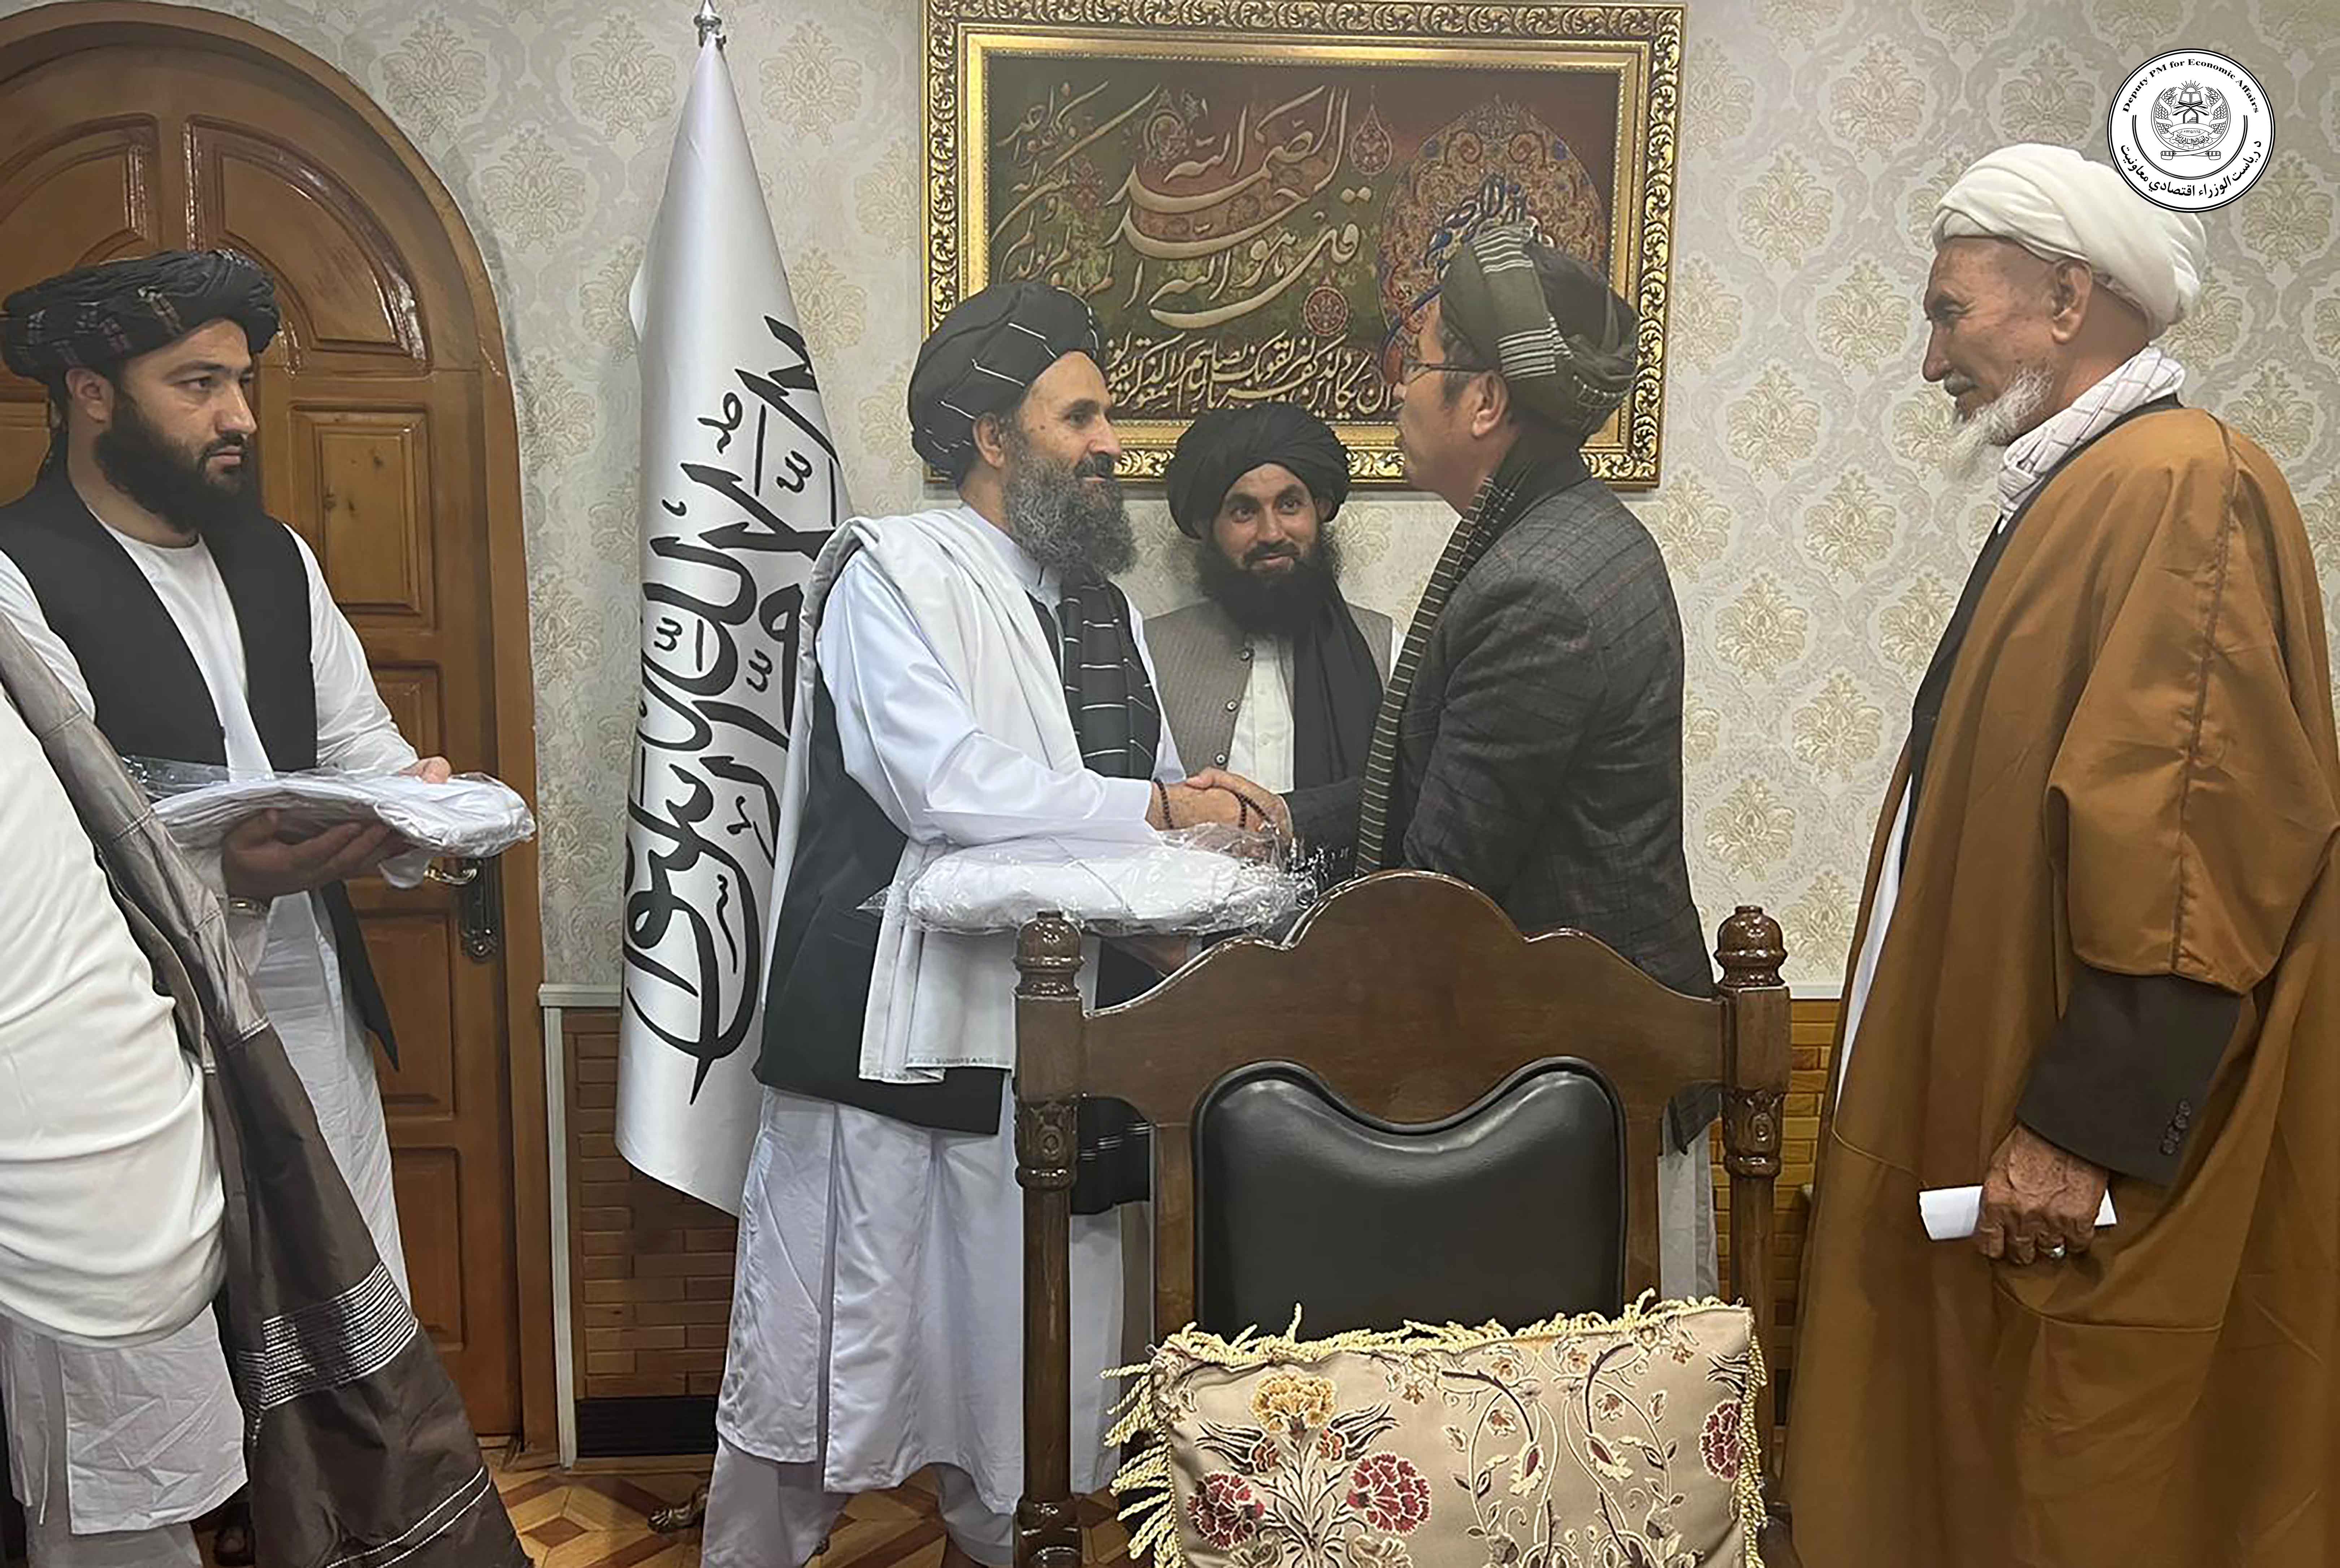 Meeting with Shia scholars and elders